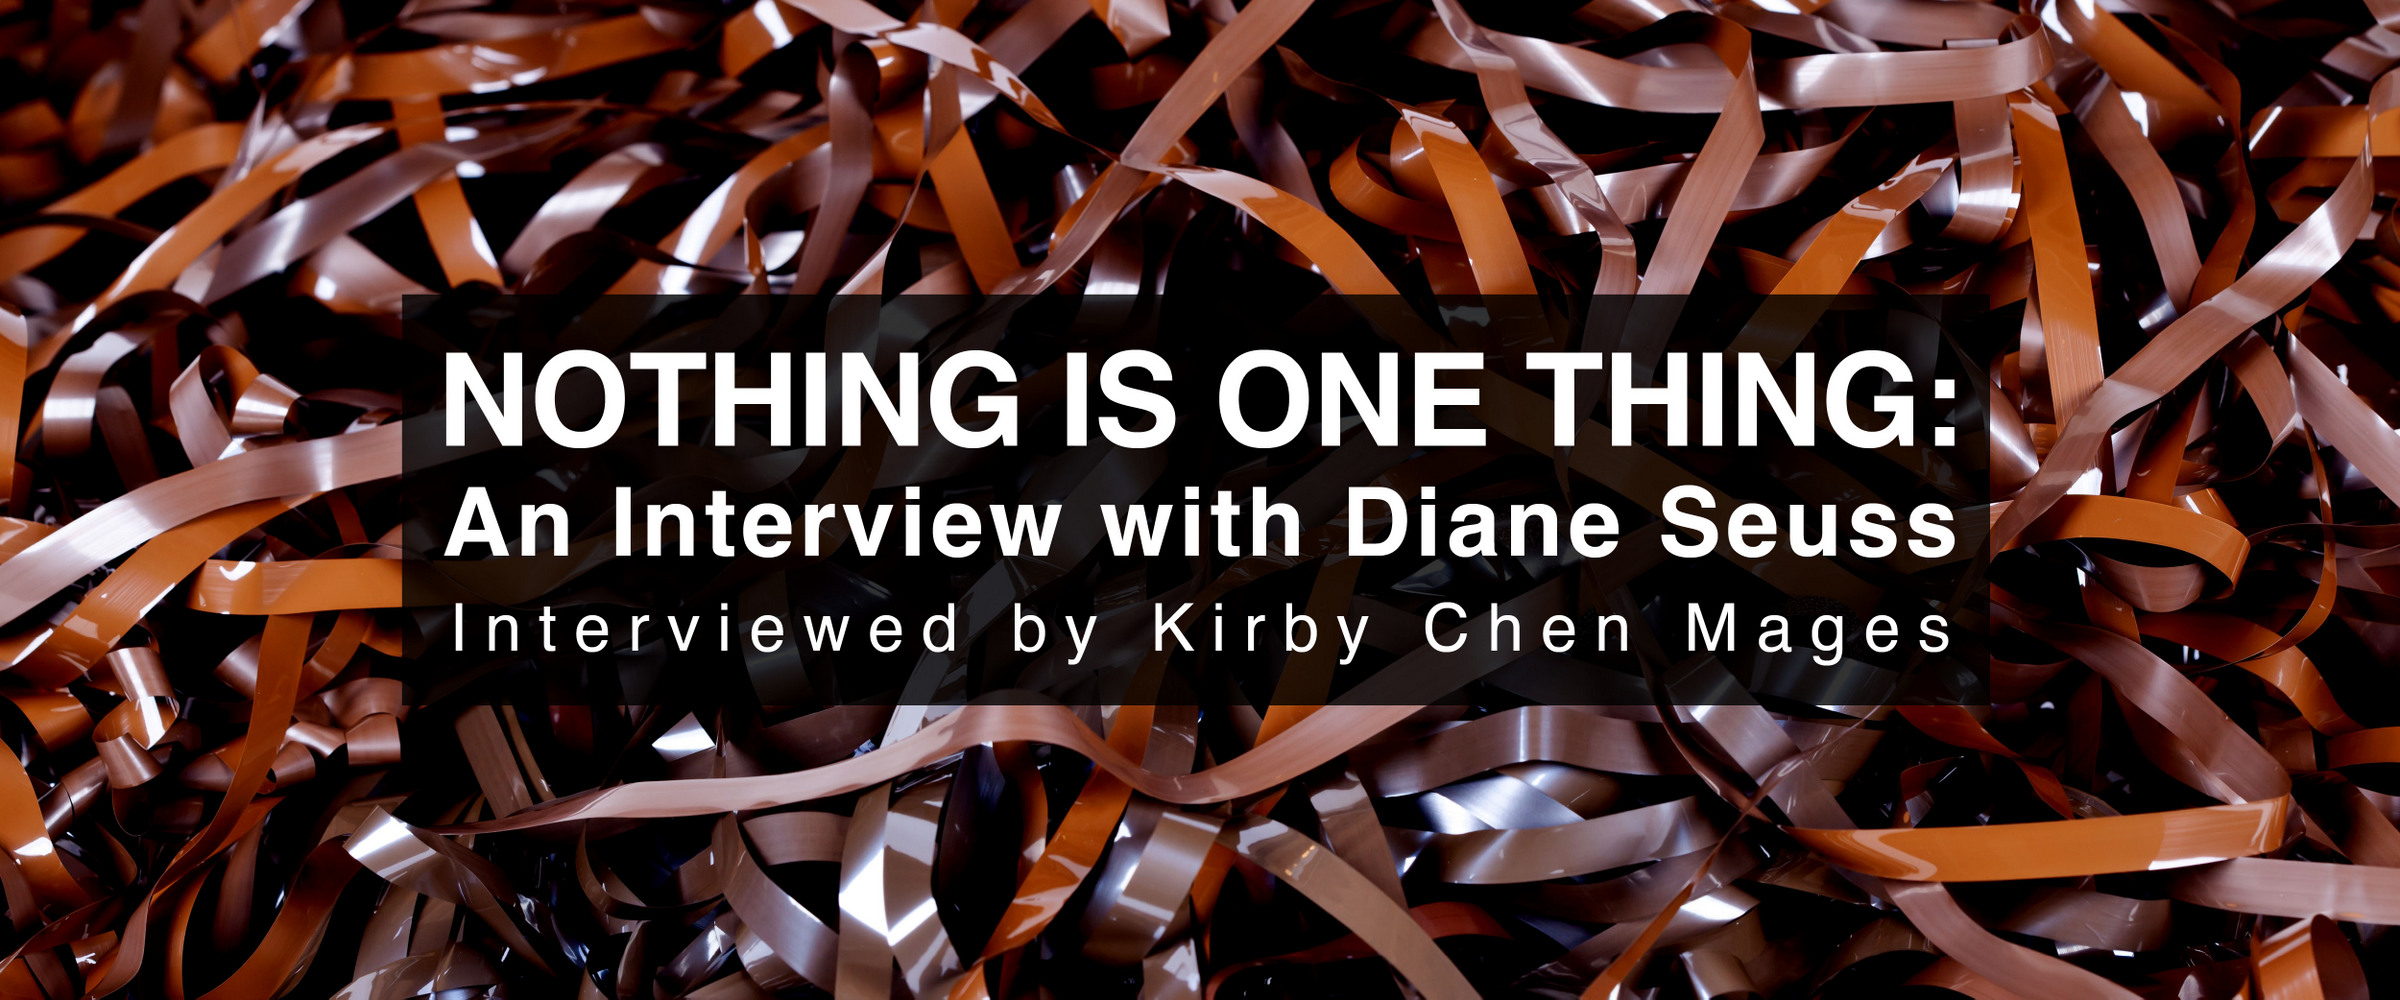 Text: Nothing is one thing: an Interview with Diane Seuss interviewed by Kirby Chen